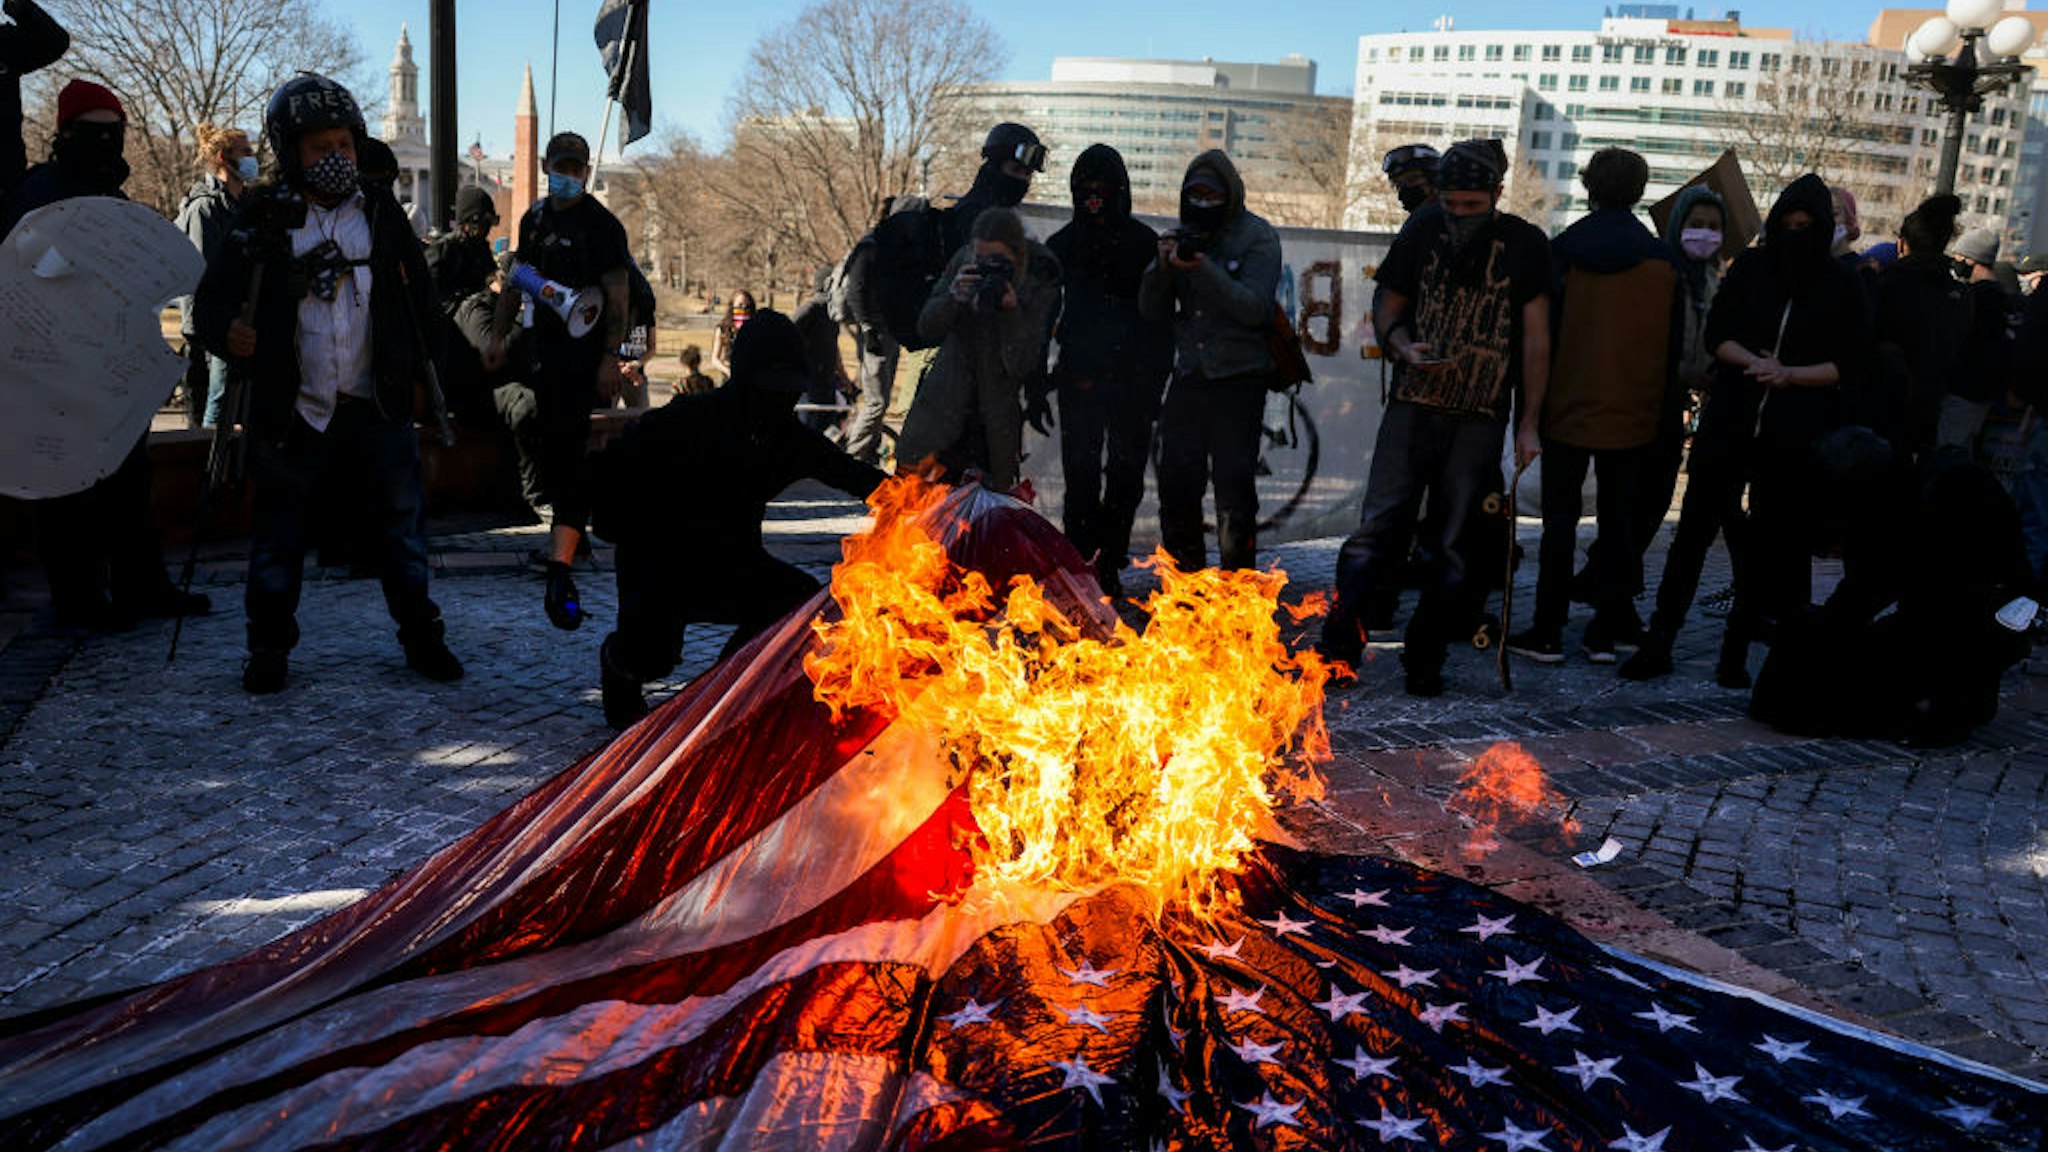 DENVER, CO - JANUARY 20: Members of the Communist Party USA and other anti-fascist groups burn an American flag on the steps of the Colorado State Capitol on January 20, 2021 in Denver, Colorado. Joe Biden was sworn in as the 46th President of the United States with Vice President Kamala Harris at an inauguration ceremony in Washington DC earlier in the day. (Photo by Michael Ciaglo/Getty Images)